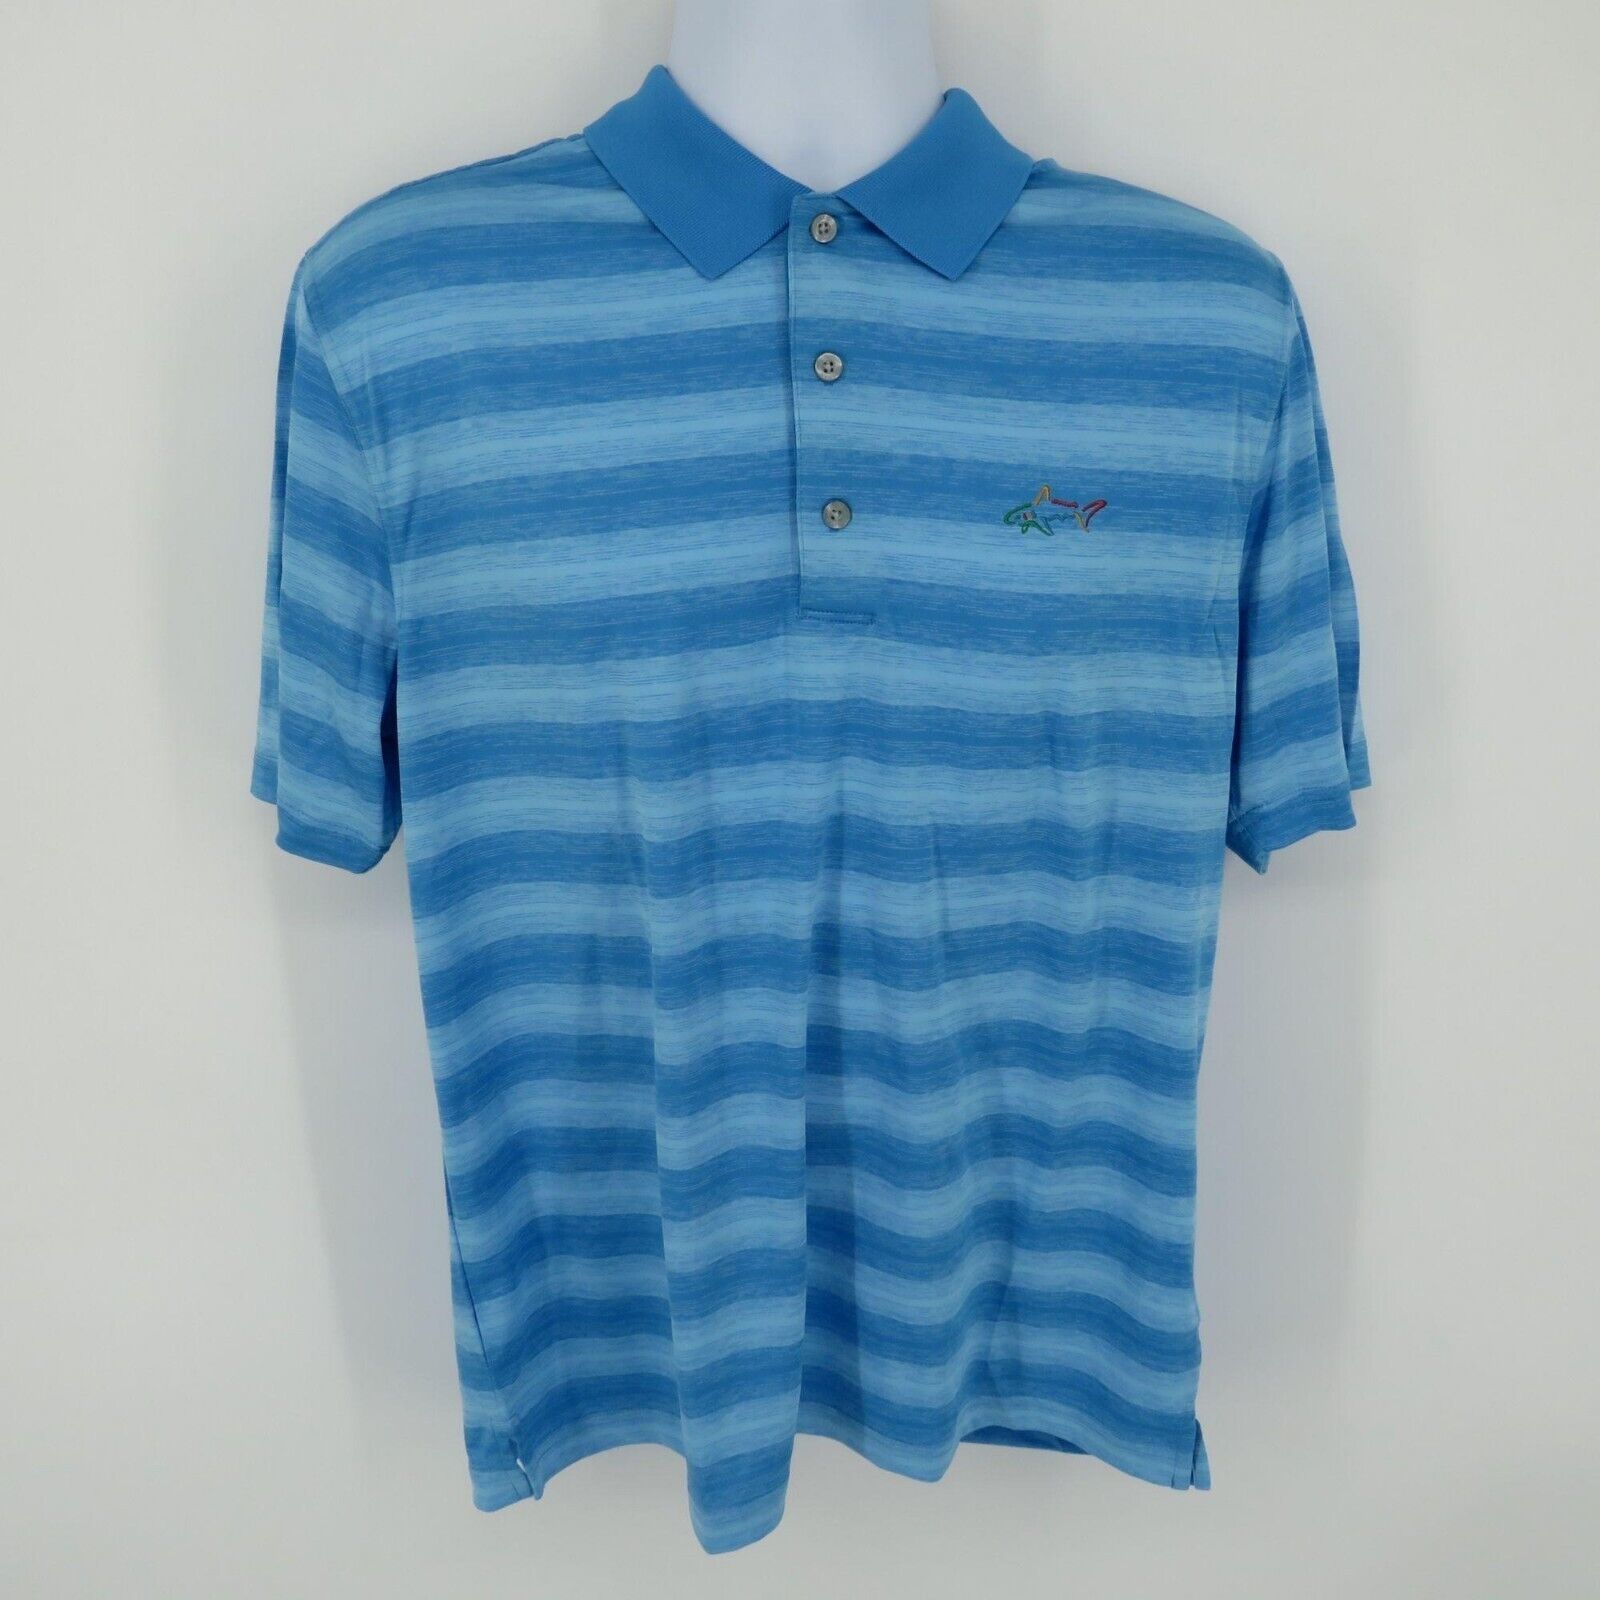 Primary image for Greg Norman Mens Medium Play Dry Blue Polo Shirt New With Tags